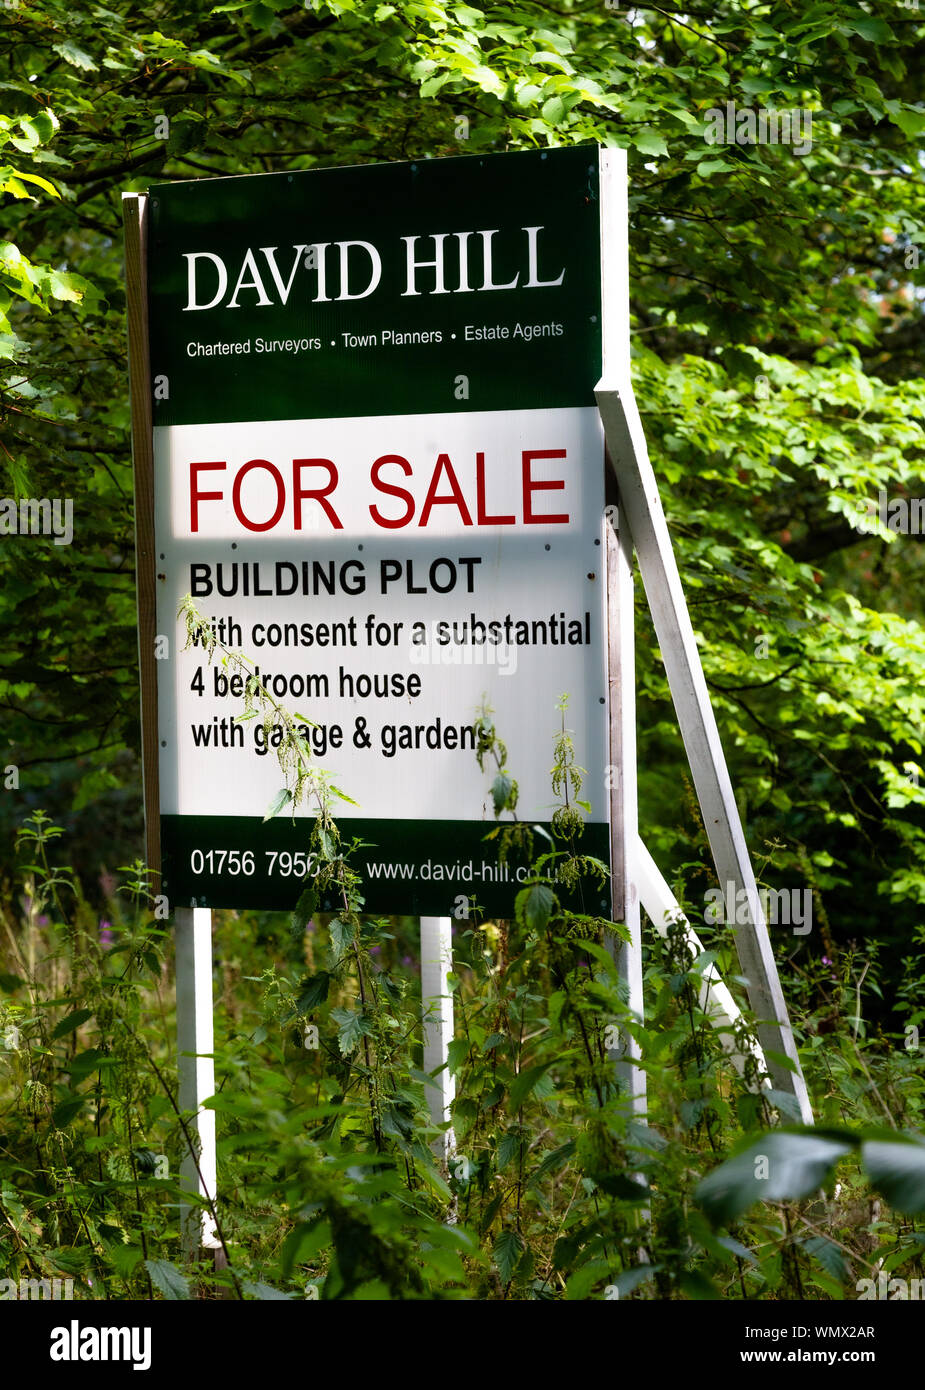 A for sale sign showing the sale of a plot of land with planning permission for building a house. Stock Photo